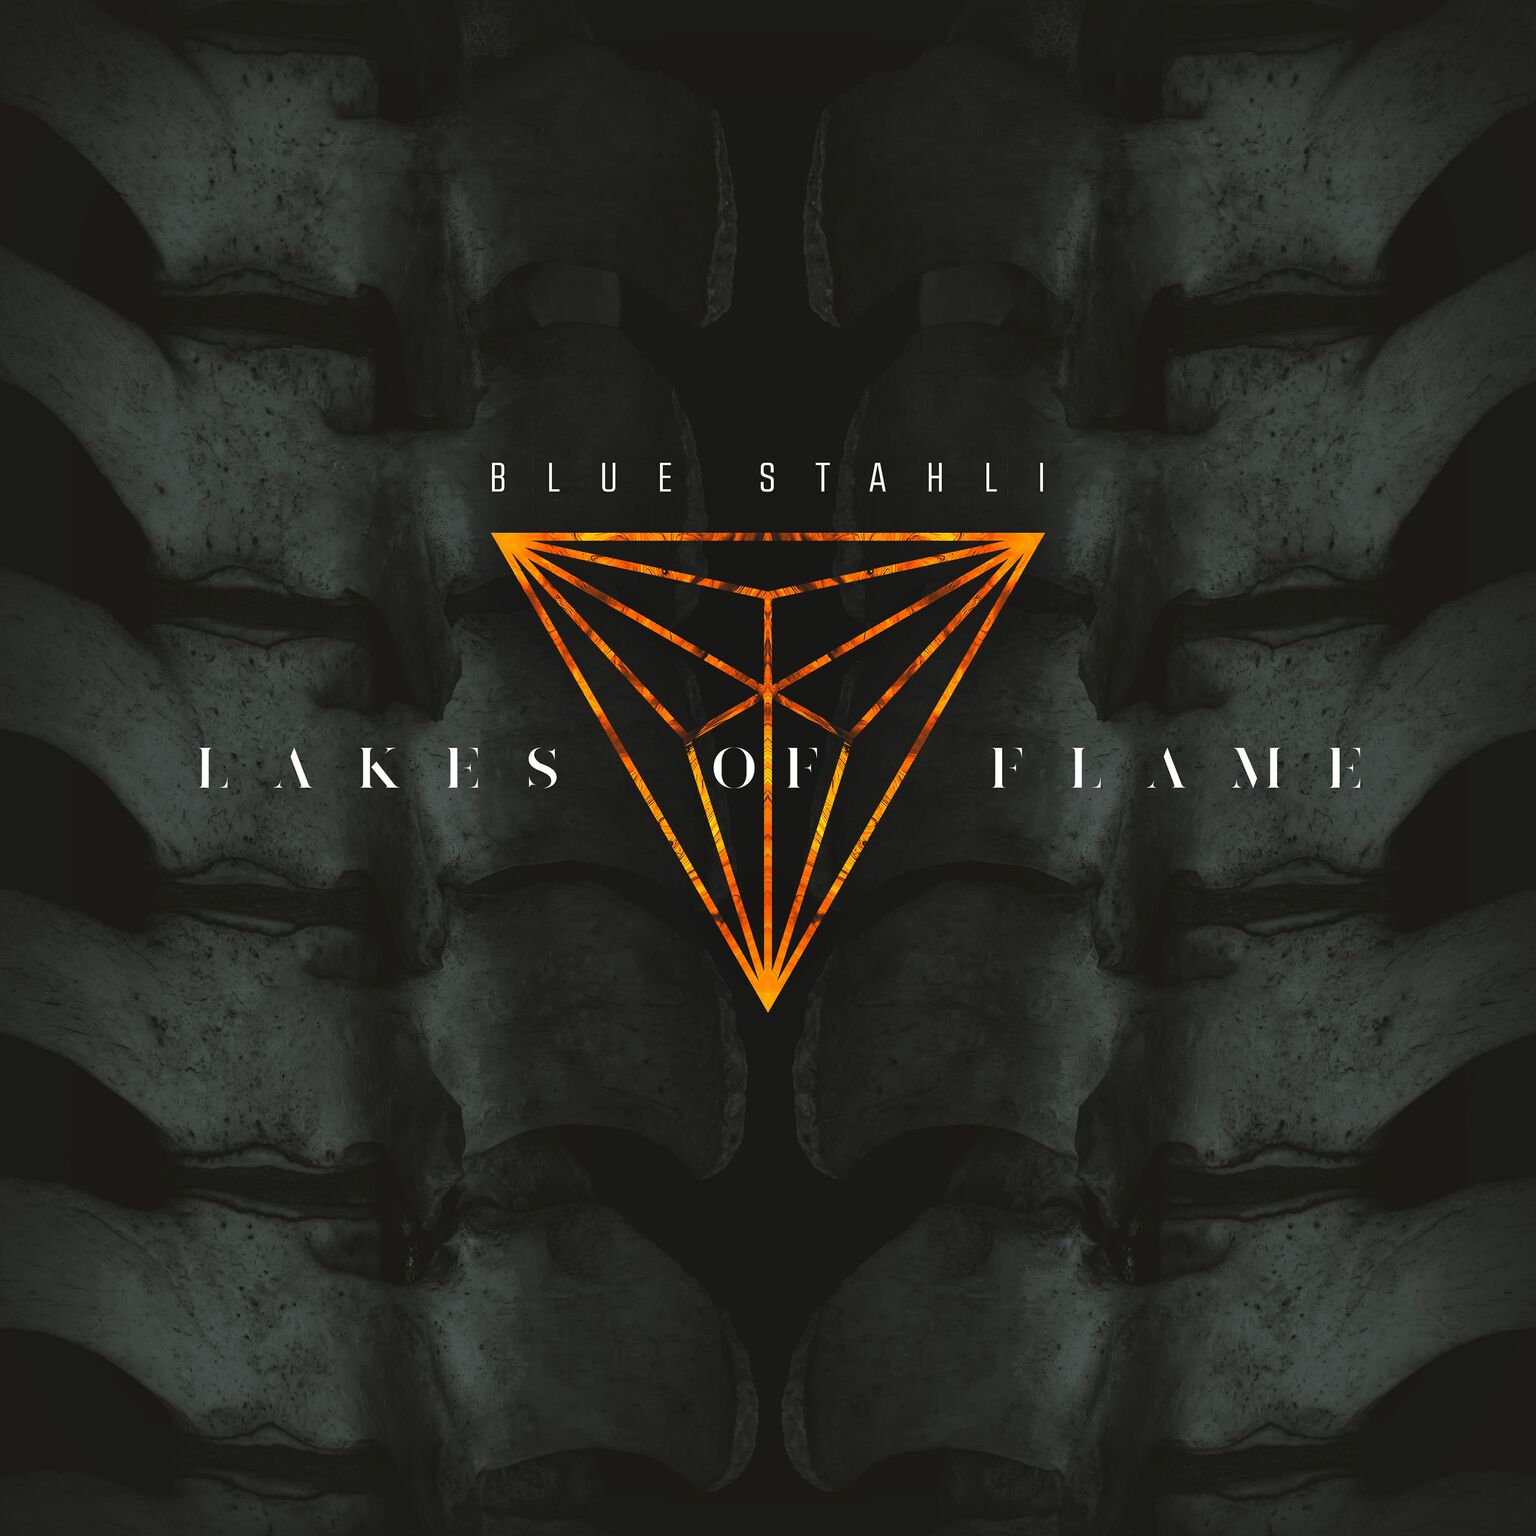 Blue Stahli premiere new song “Lakes of Flame”